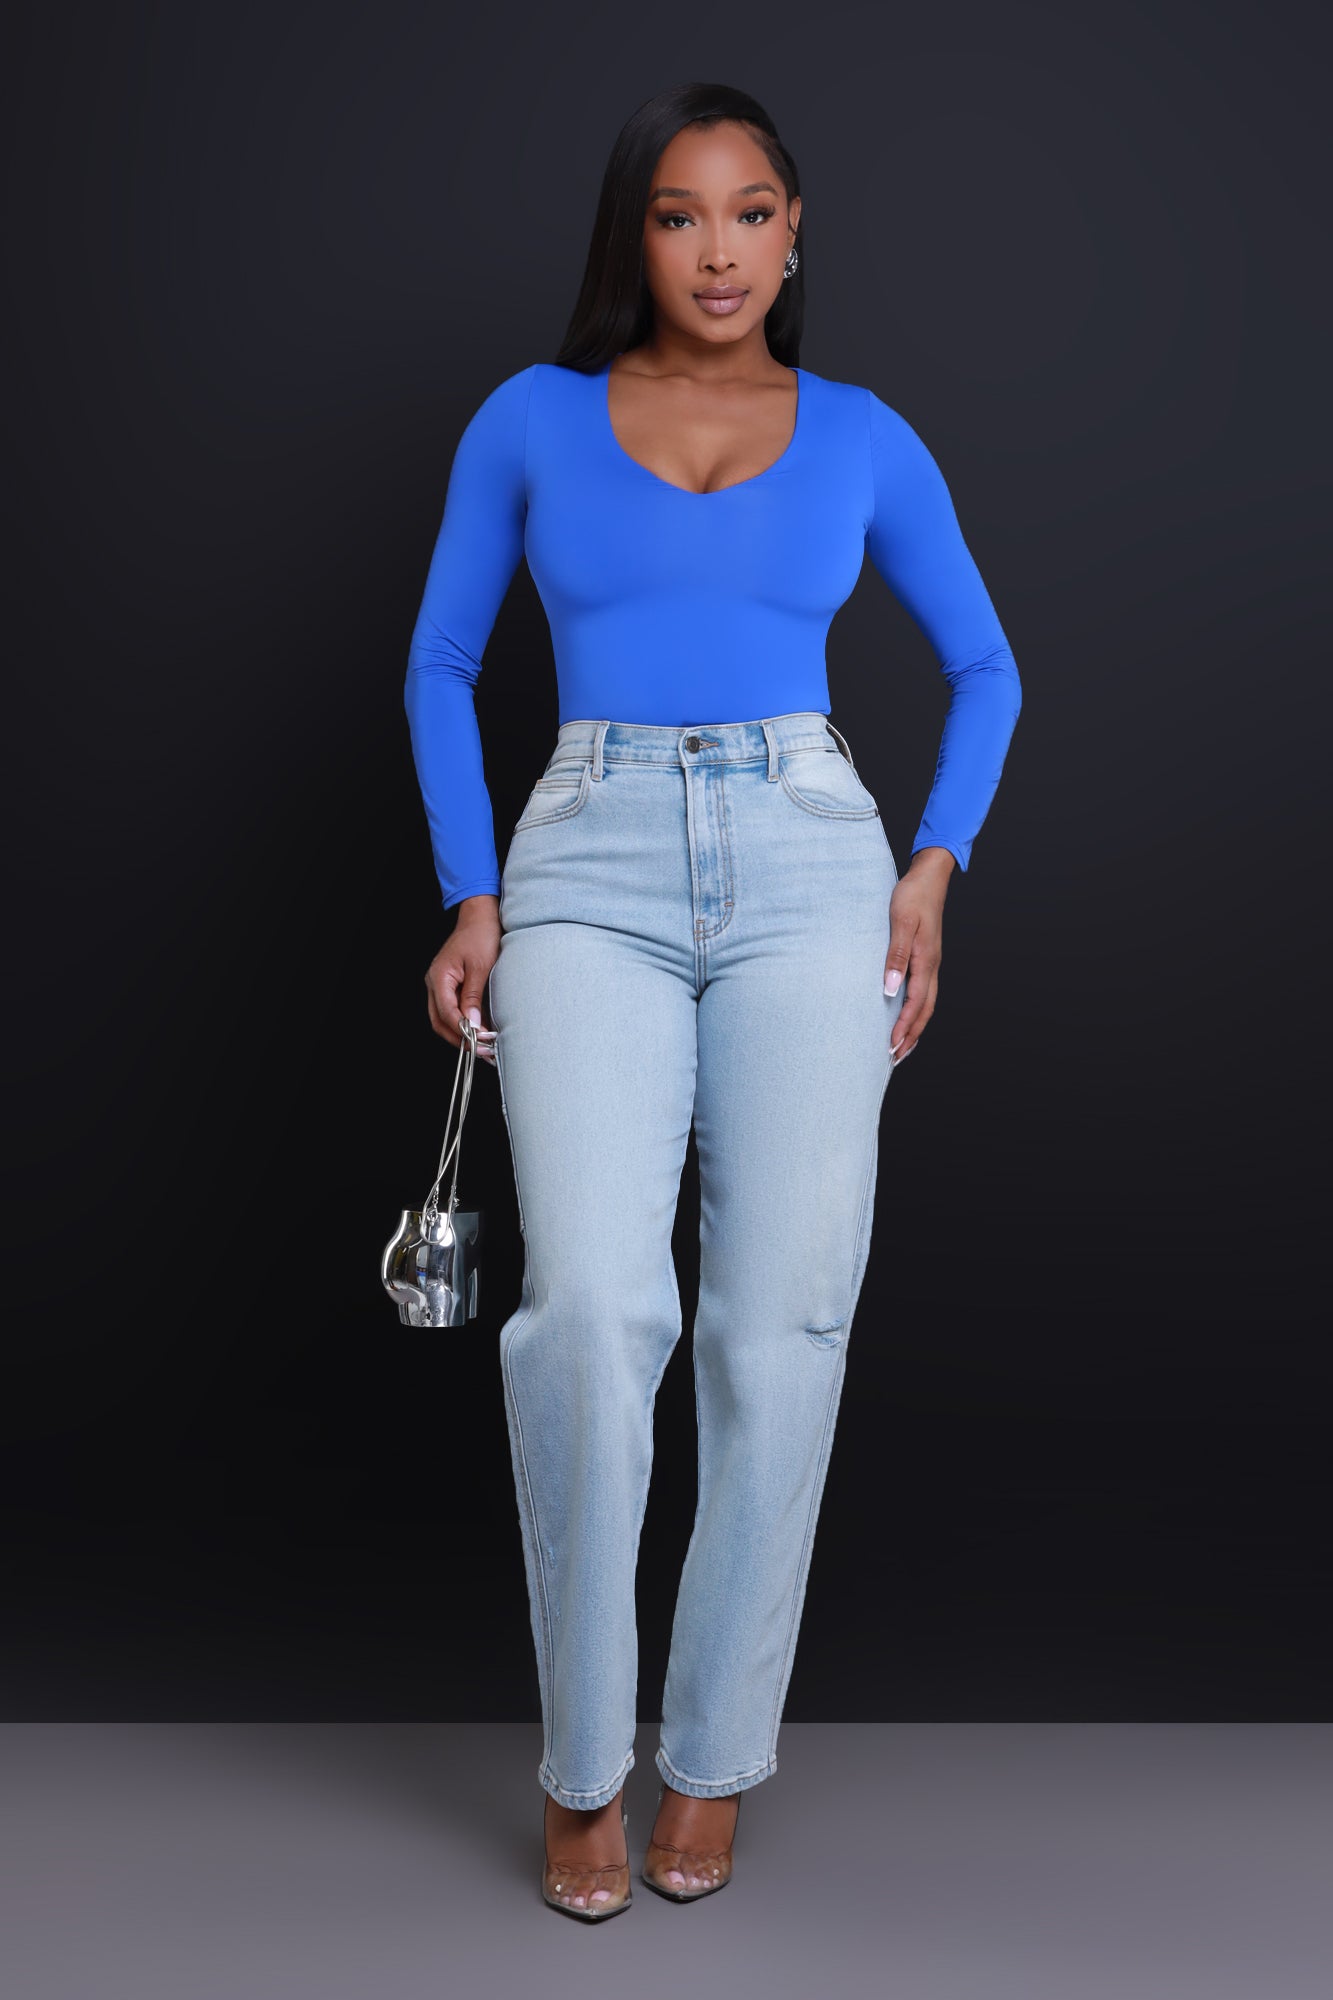 Count Me In Long Sleeve Top - Royal Blue - Swank A Posh